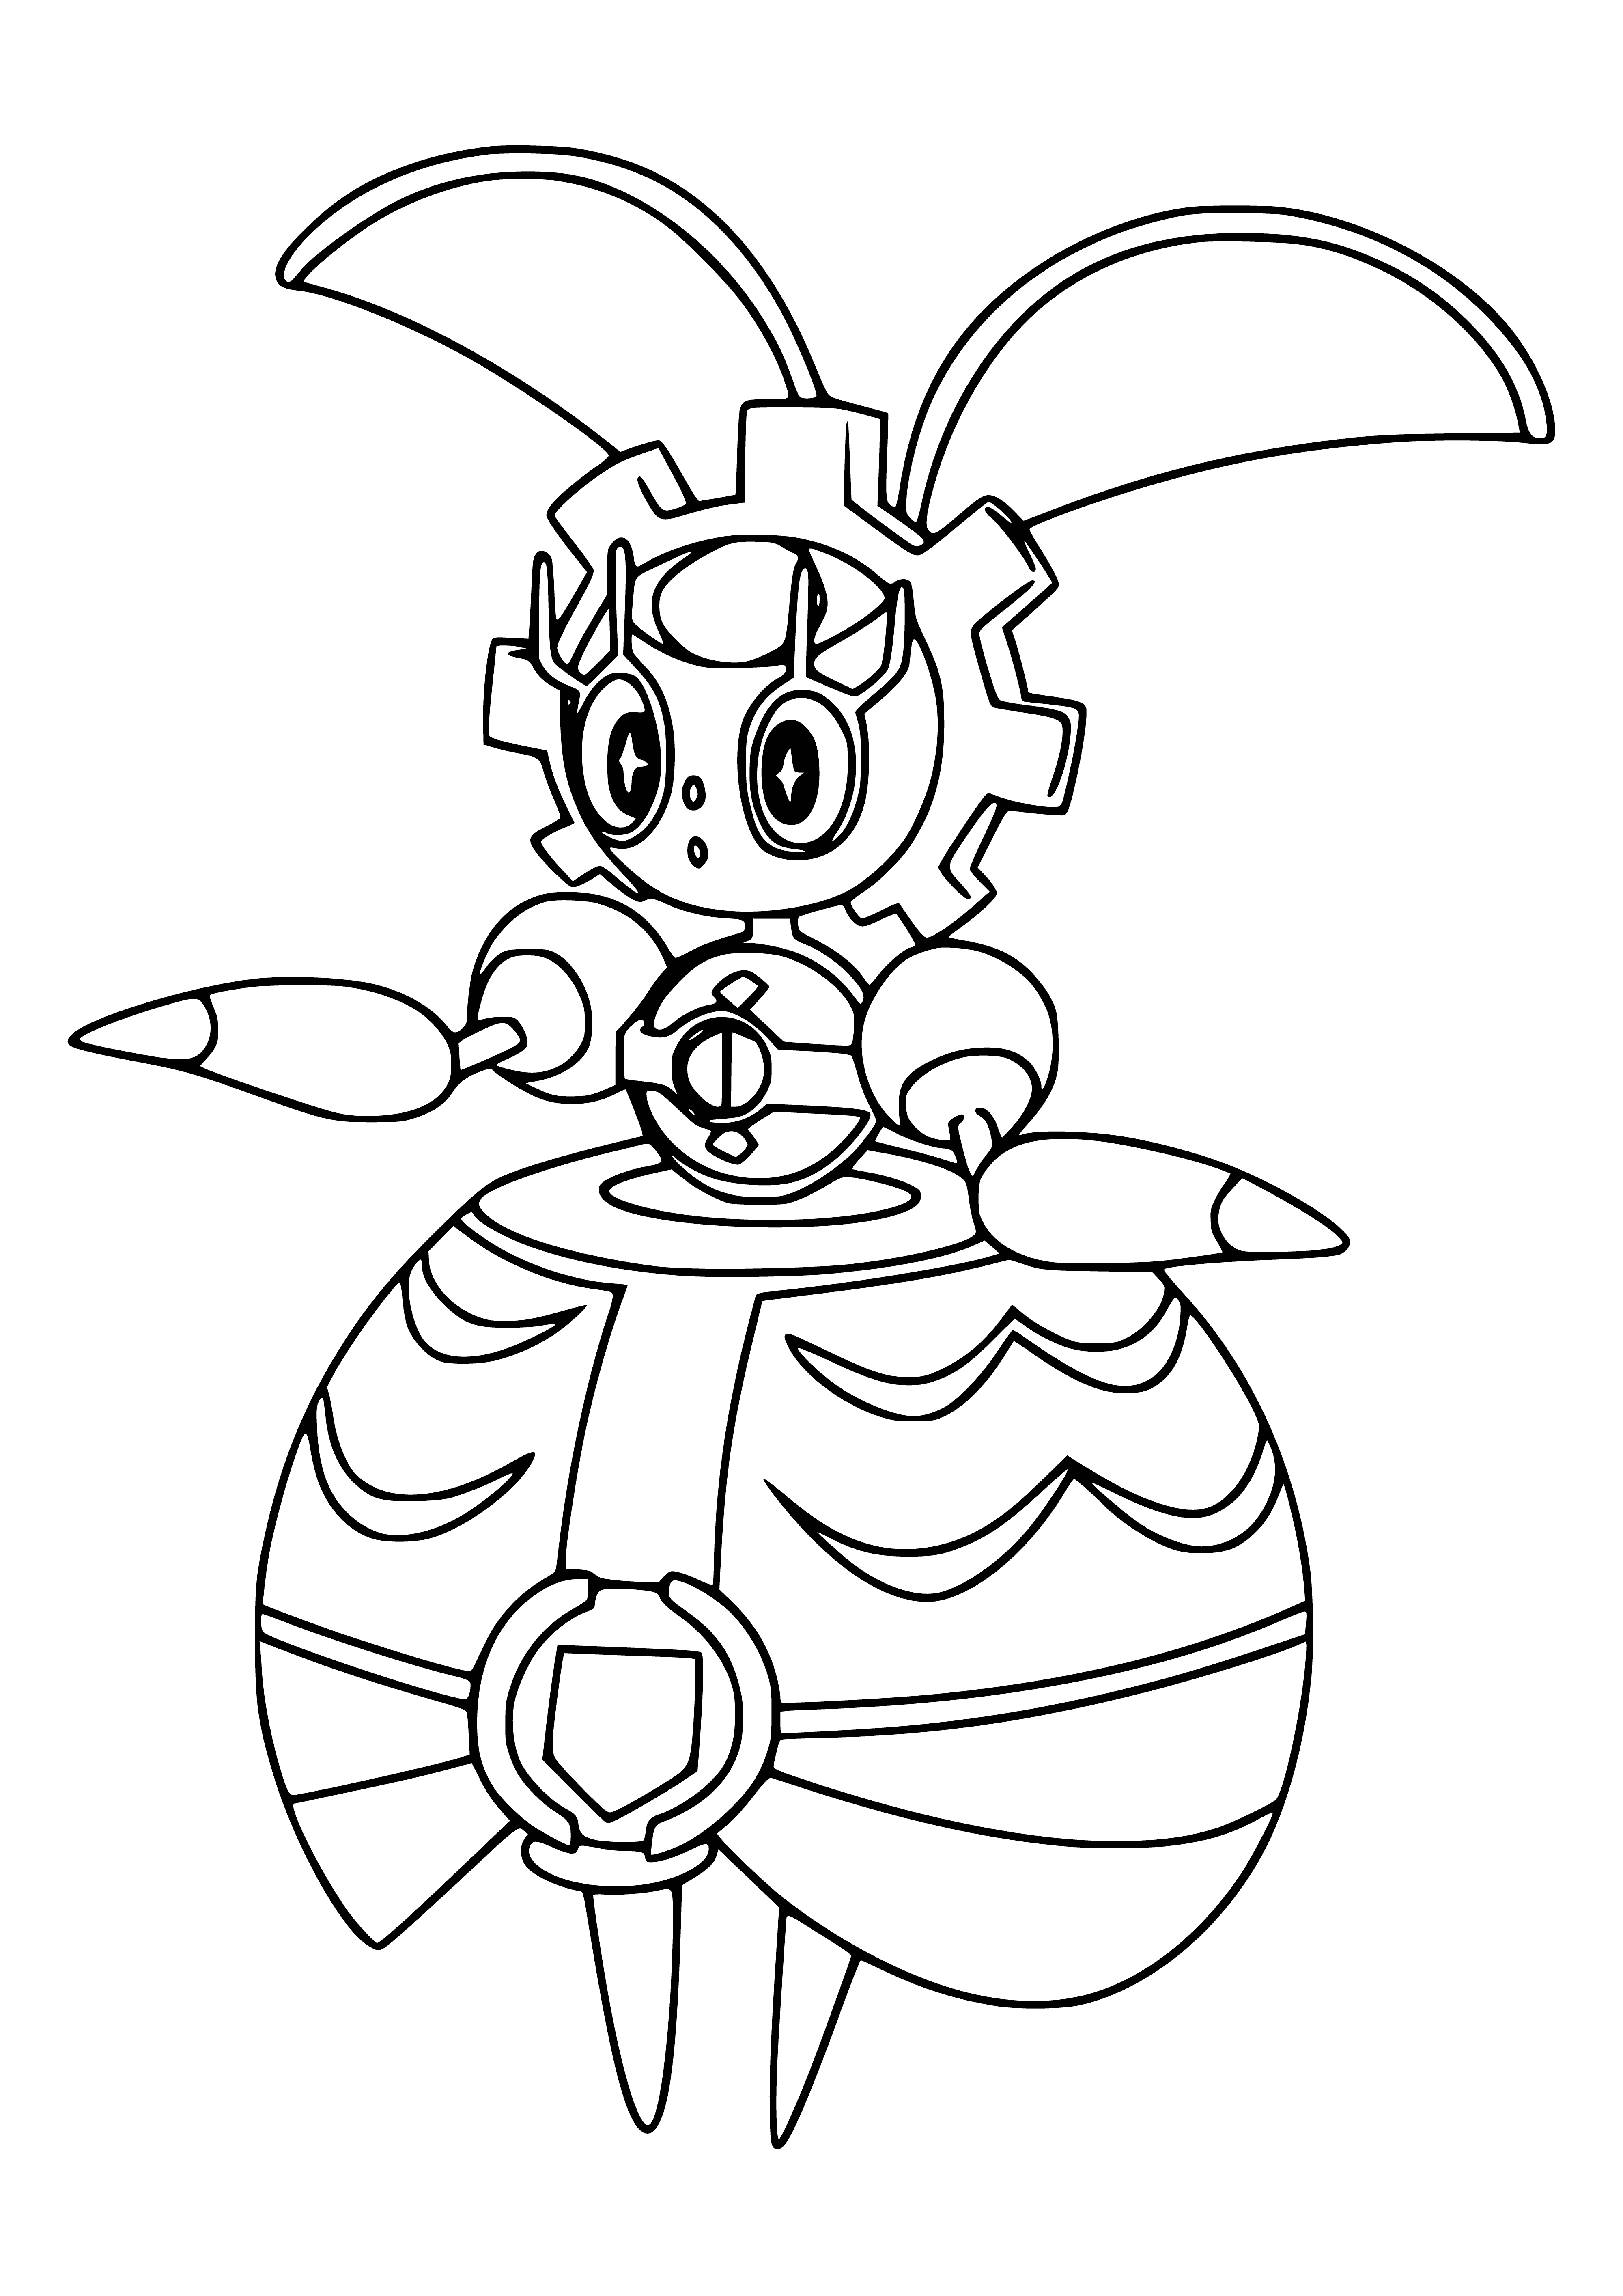 Legendary Pokemon Magearna coloring page